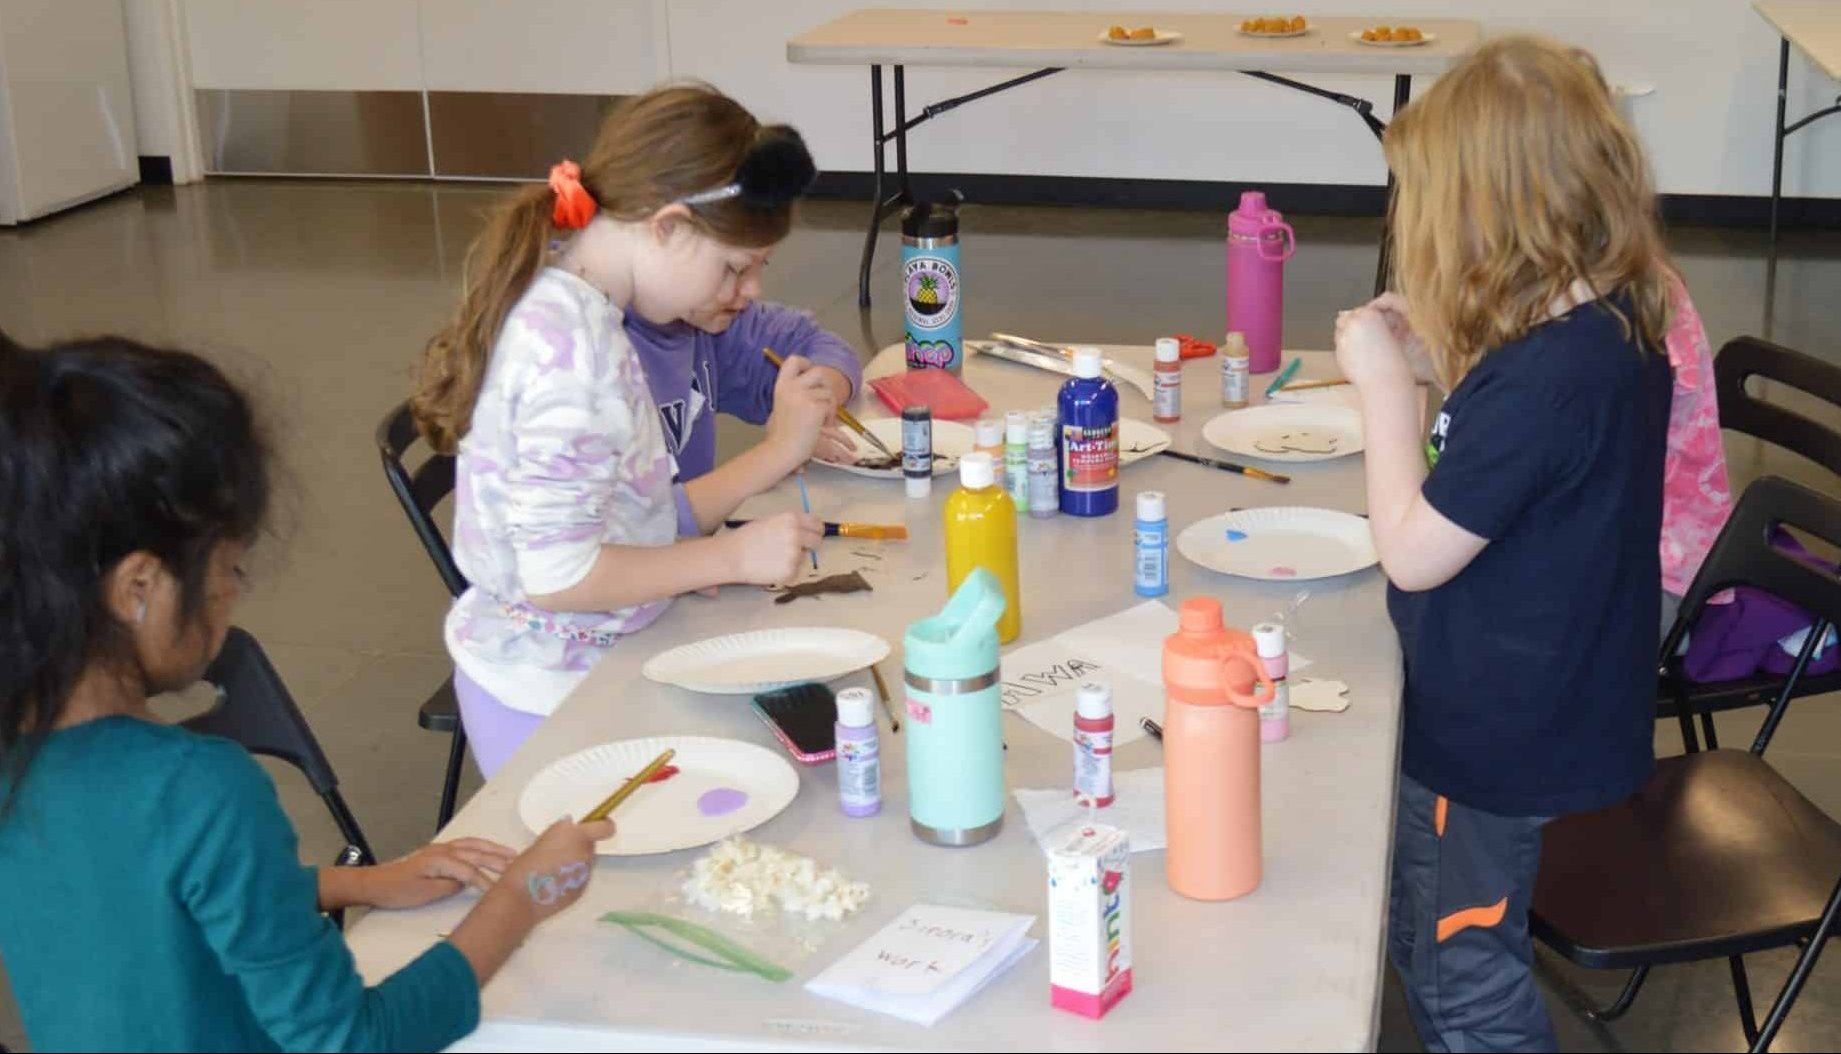 Children at table making arts and crafts at Animal Welfare Association's Kids Day Off Camp.